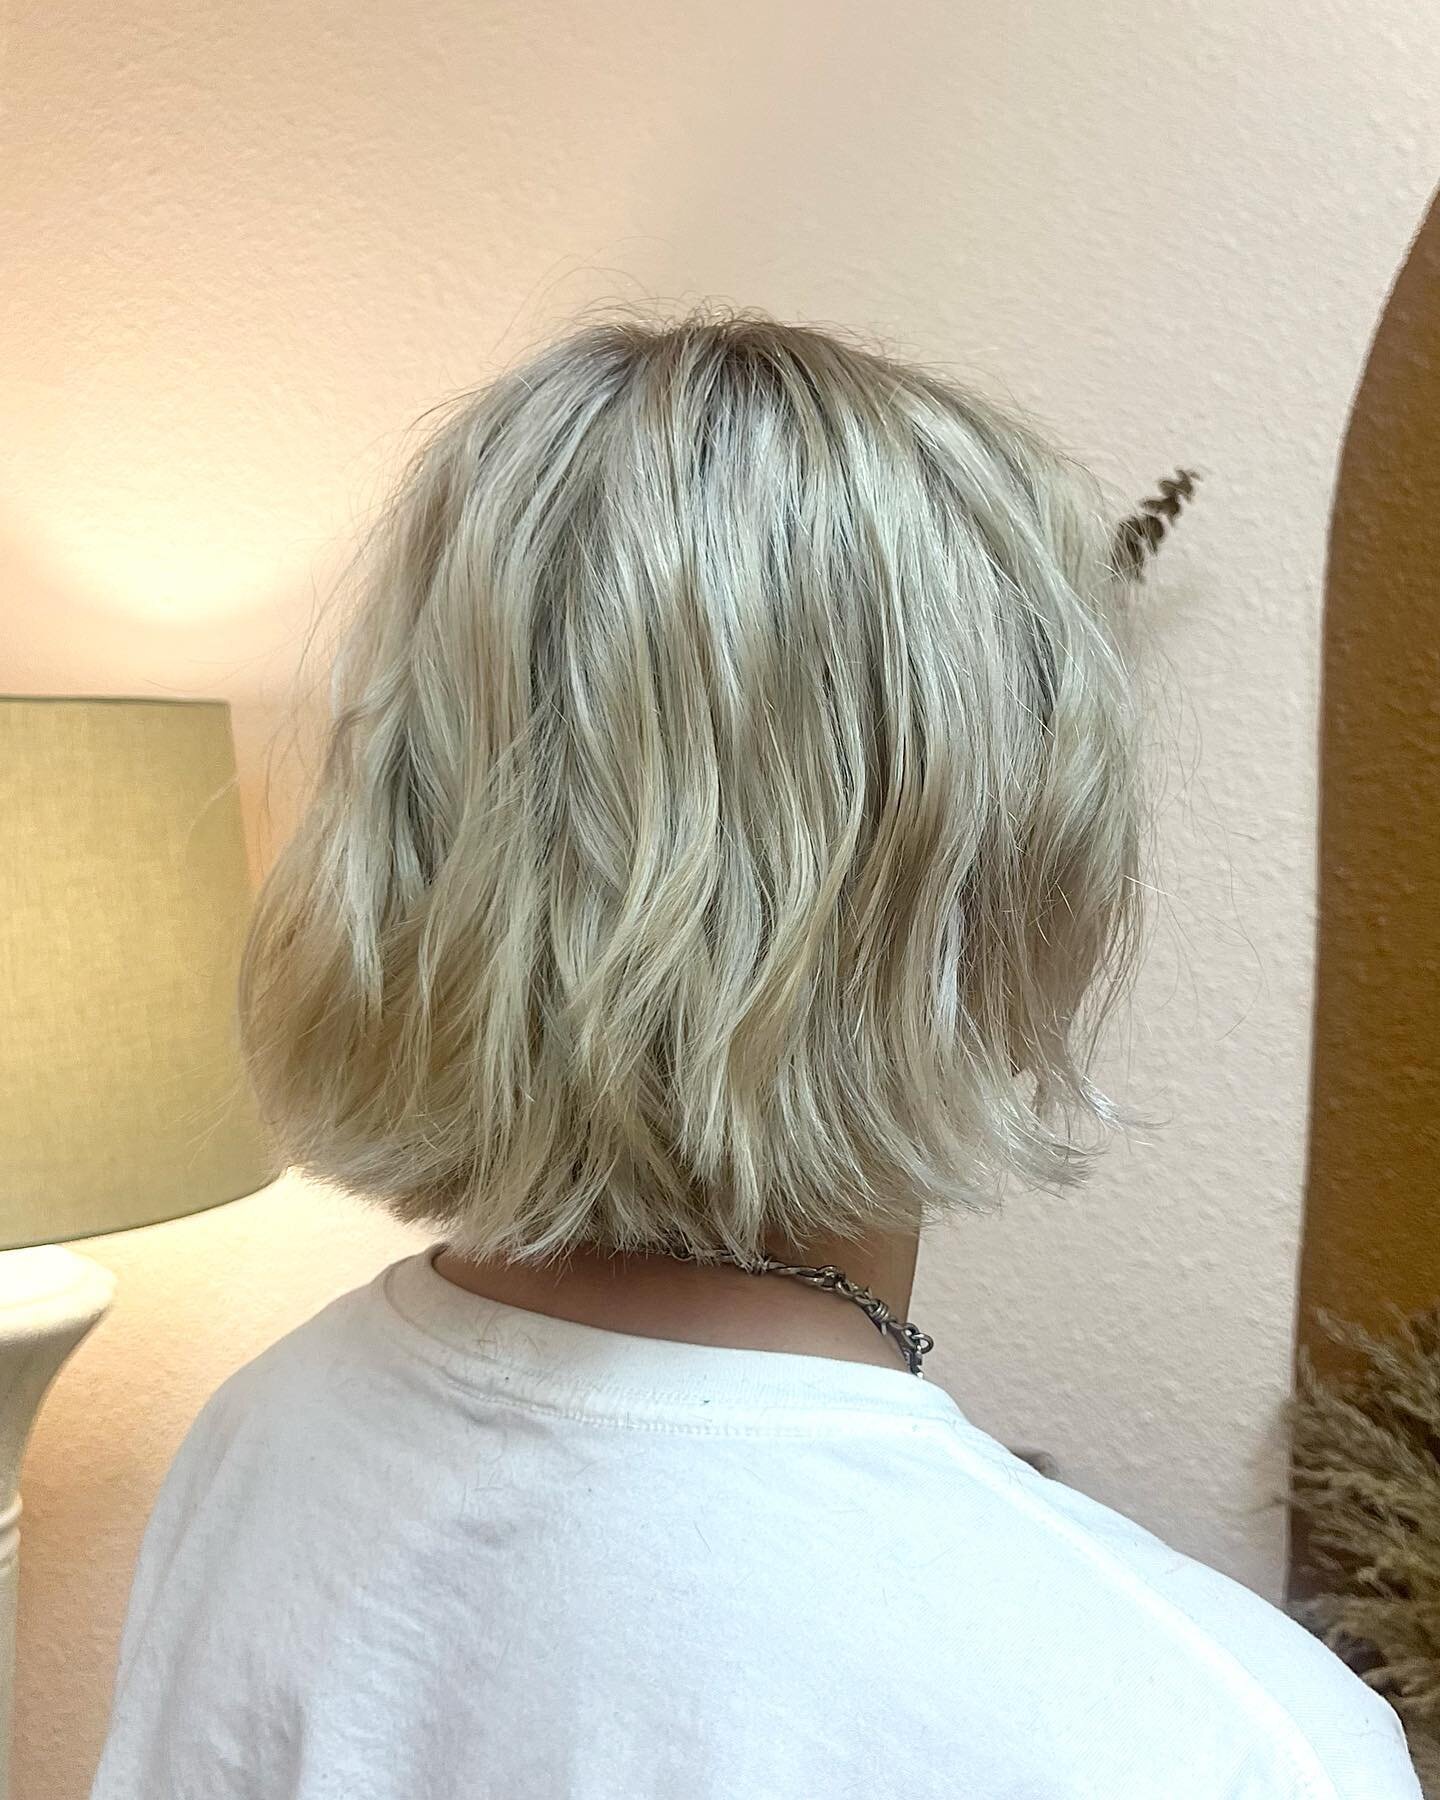 Platinum blonde textured bobs ✧
Maneandmusesalon.com to book
&bull;
Looking to change up your color? Send a DM and we can do a virtual text consult! Or book a consultation with me in the studio🤍
&bull;
@4bassett @davinescolor @davinesofficial 
&bull